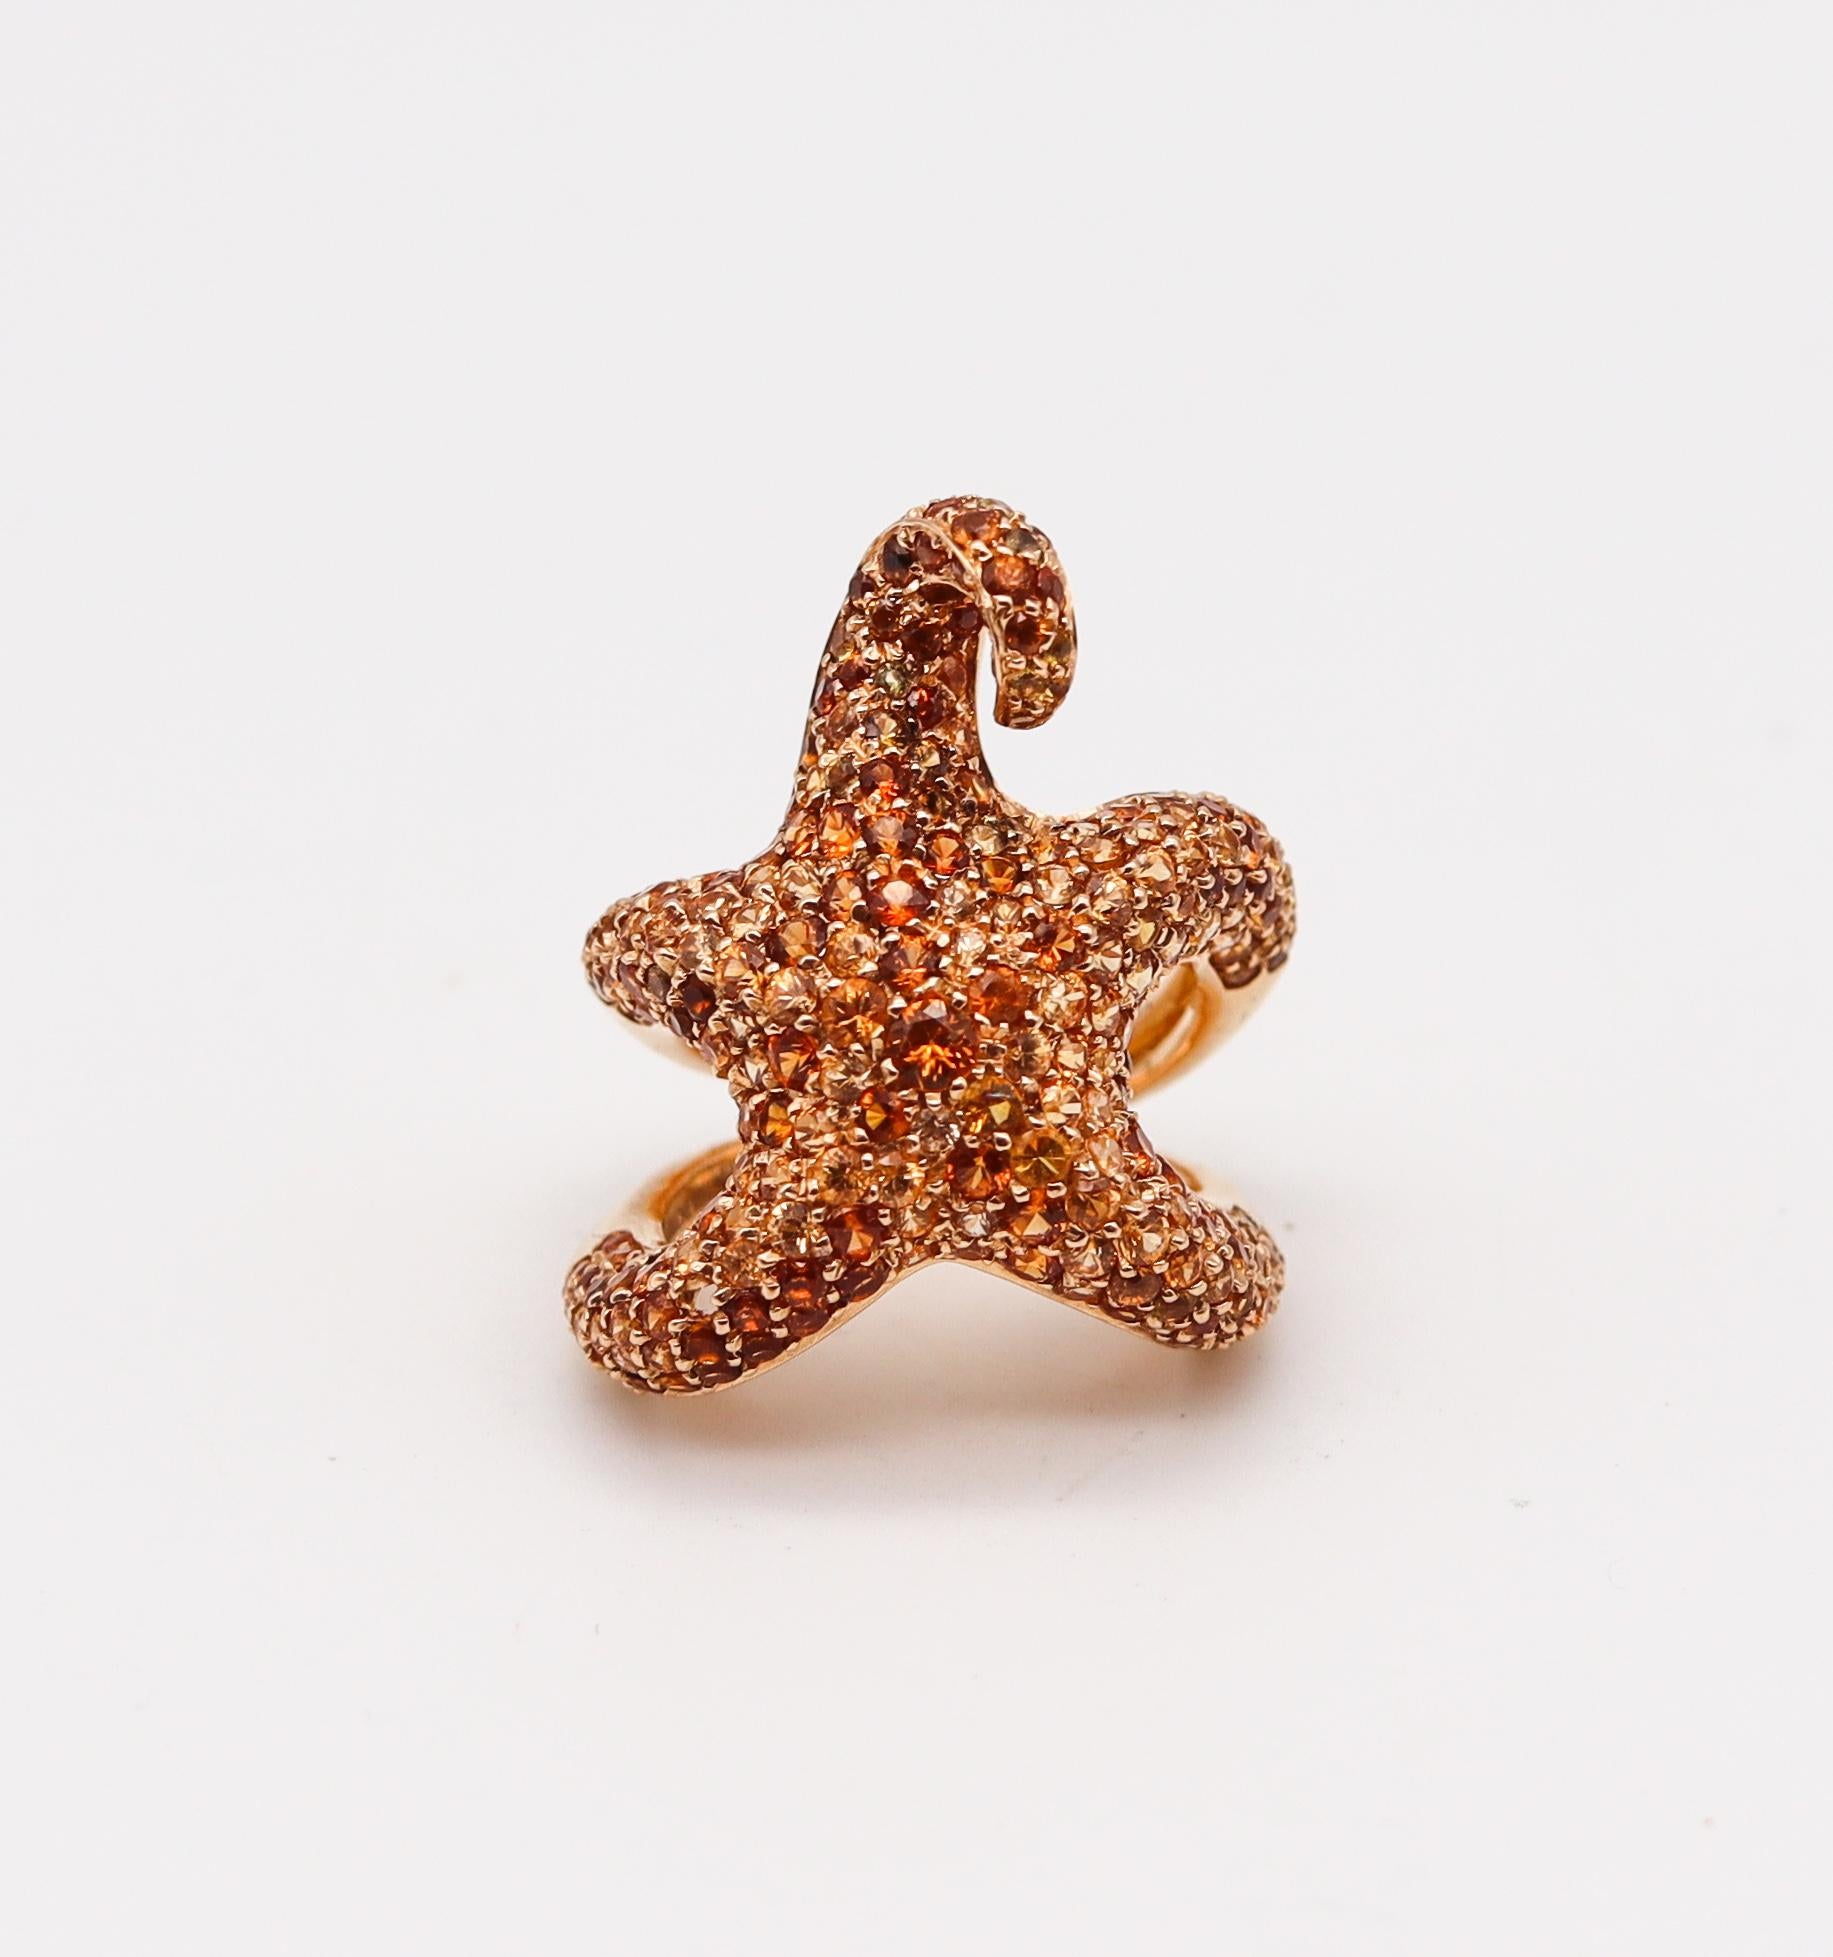 An octopussy ring designed by Boucheron.

Beautiful modernist piece, created in Paris France by the jewelry house of Boucheron. This three-dimensional cocktail ring was carefully crafted in the shape of a sculptural octopussy in solid yellow gold of